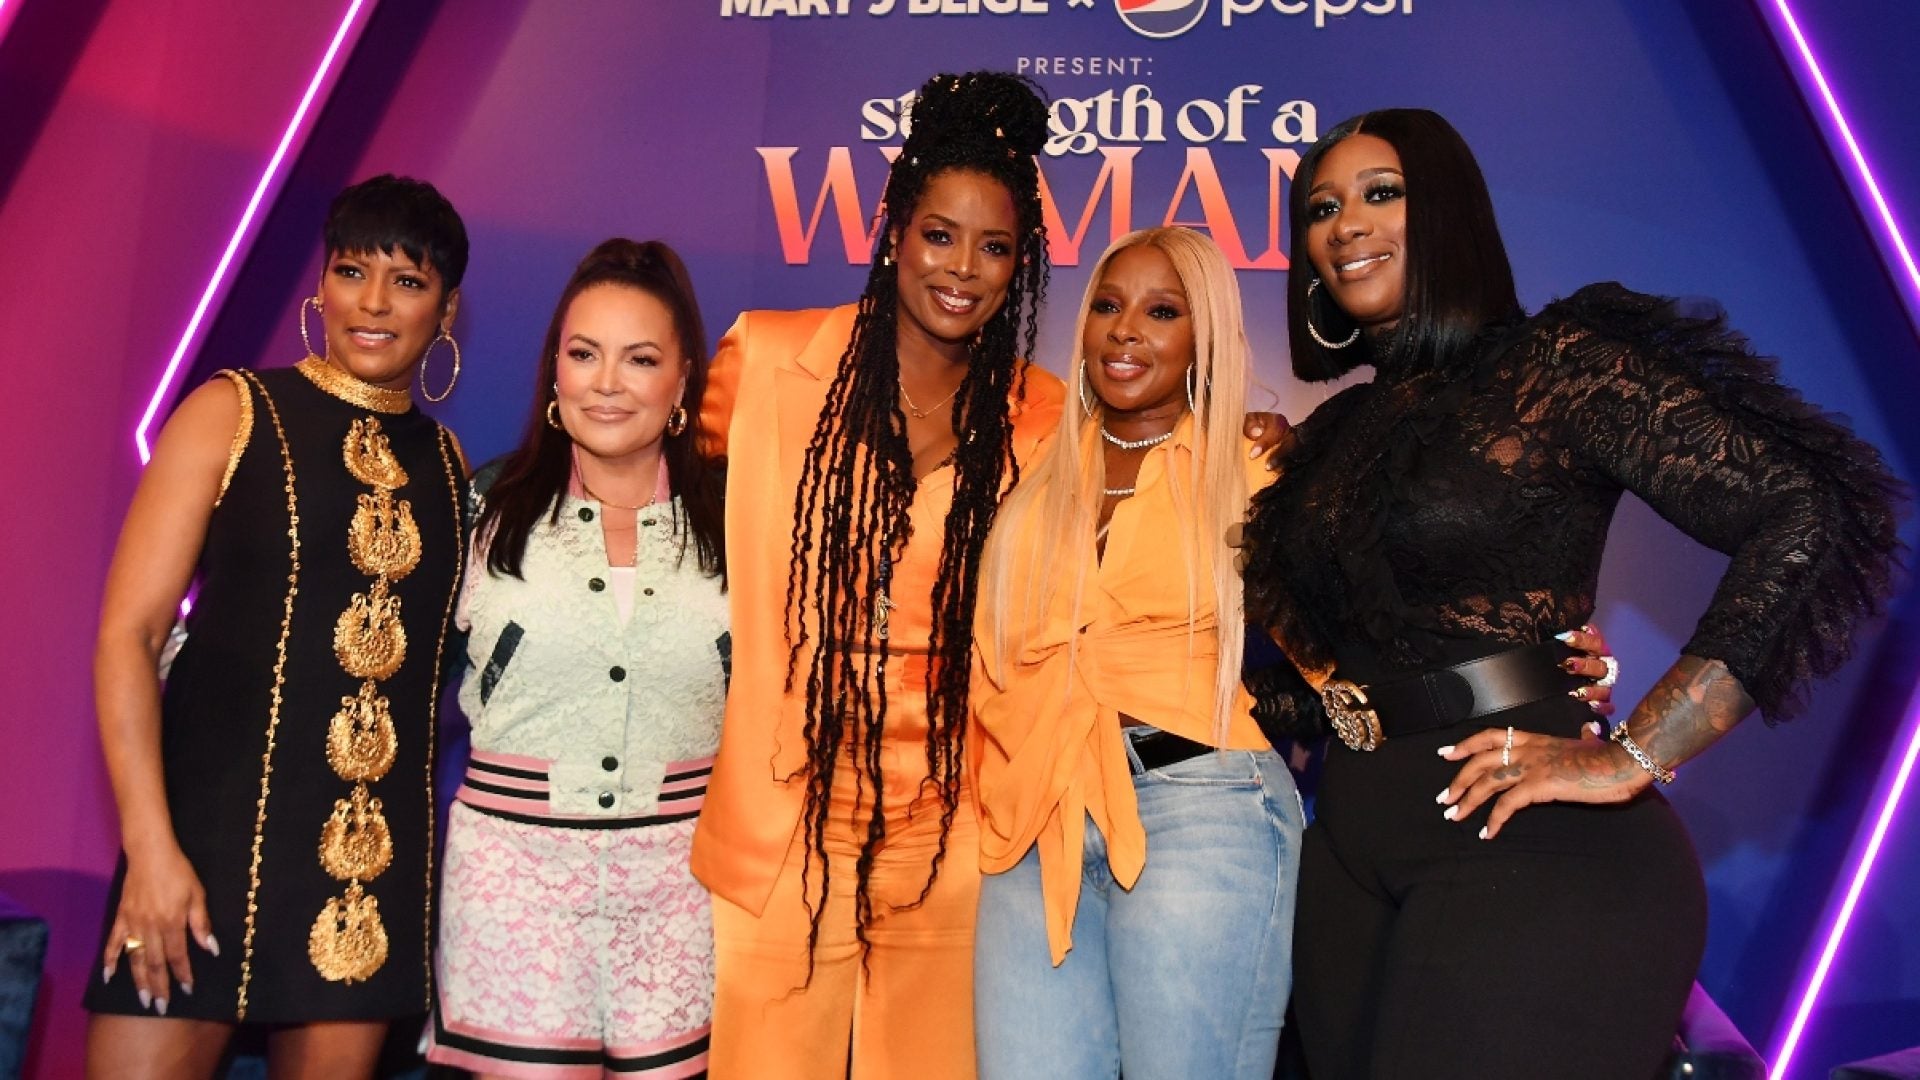 No More Pain: Mary J. Blige's Strength Of A Woman Summit Brings Atlanta Together In The Name Of Female Empowerment